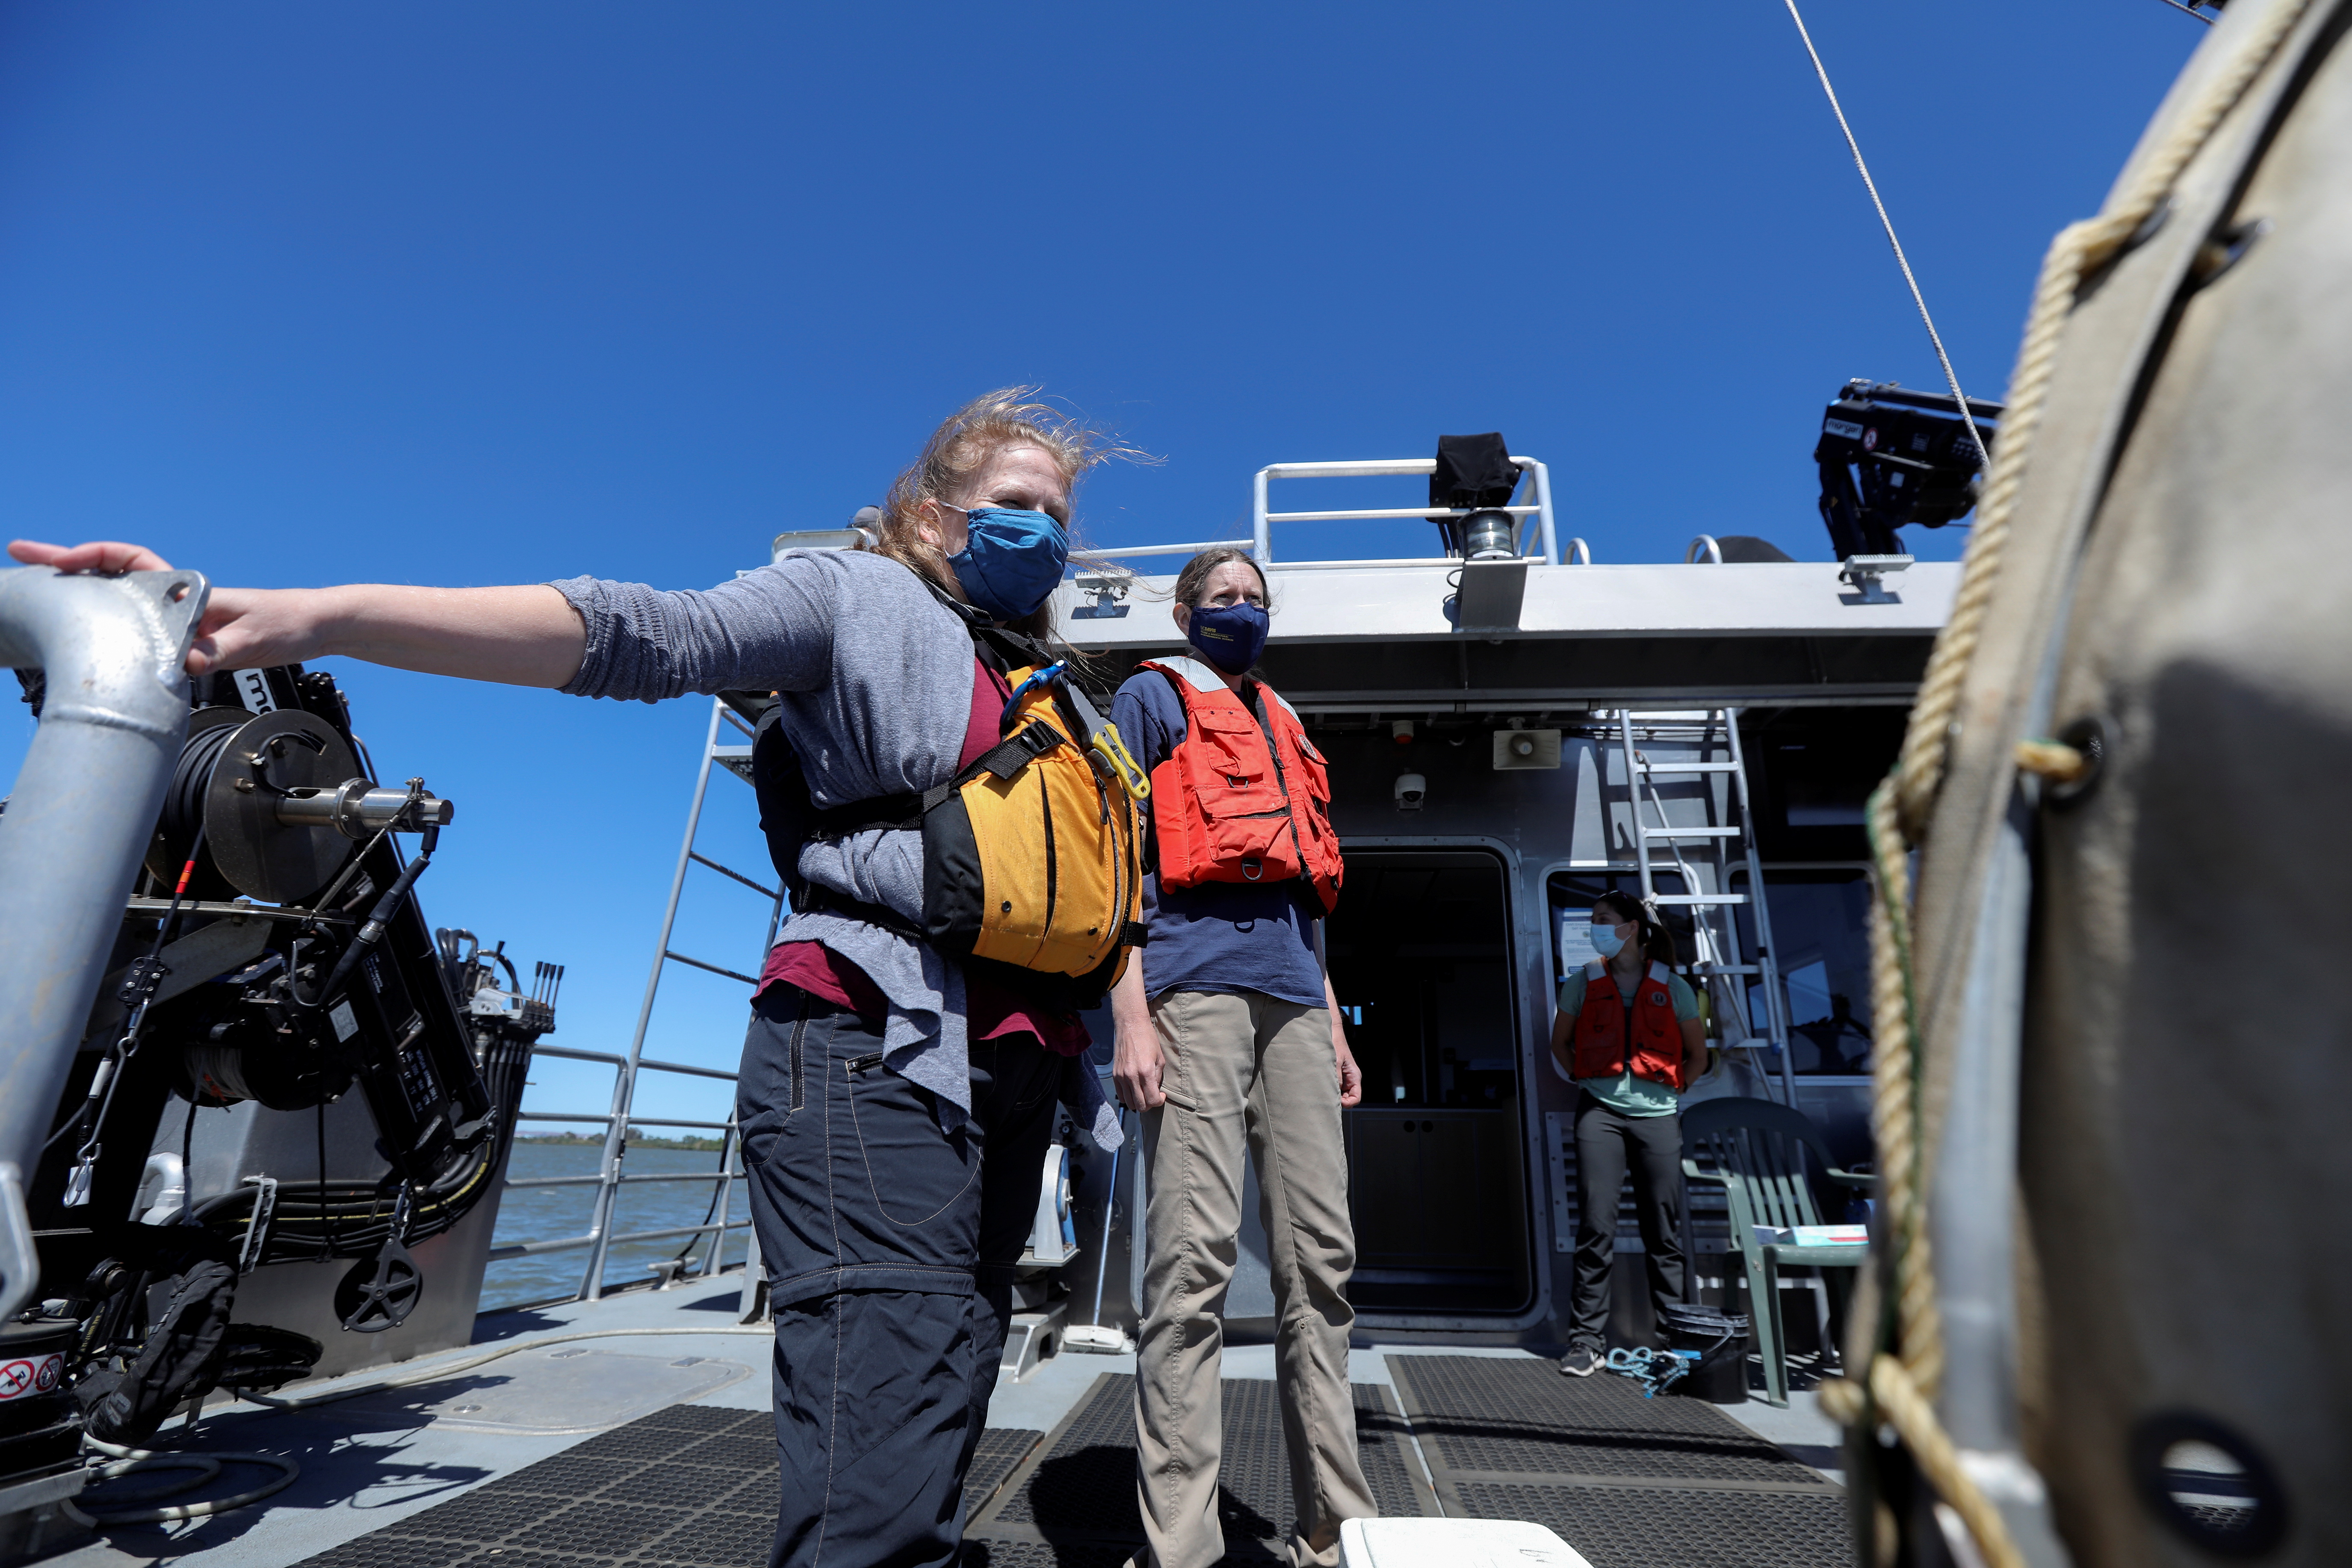 Researchers Melinda Baerwald and Andrea Schreier stand at the stern of a research vessel on the San Joaquin River off Antioch